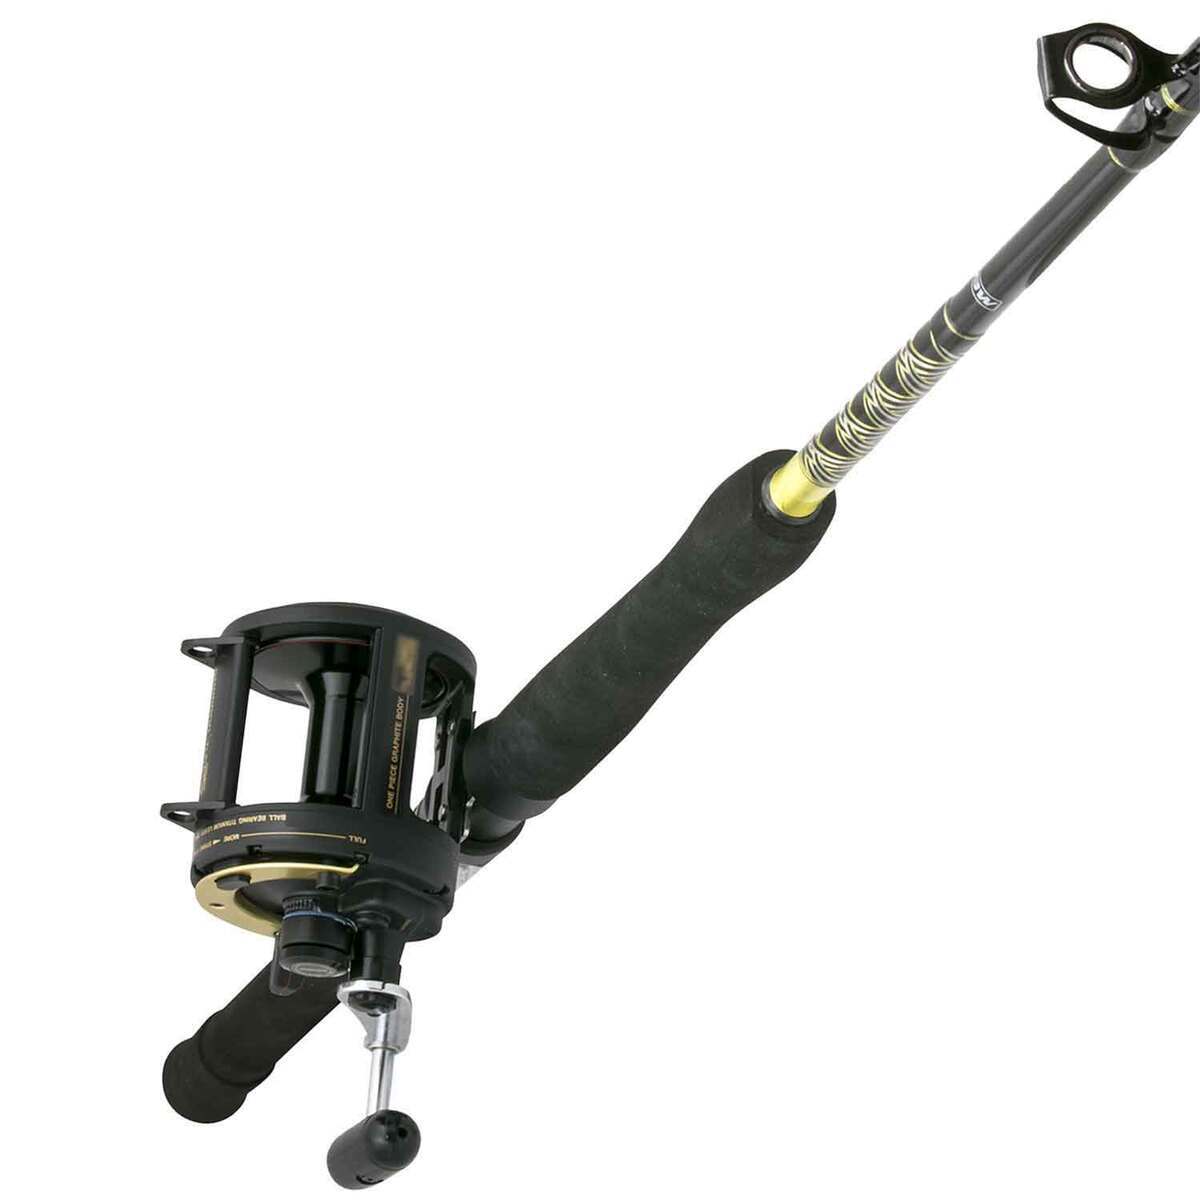 Shimano Saltwater Fishing Rod & Reel Combos for sale